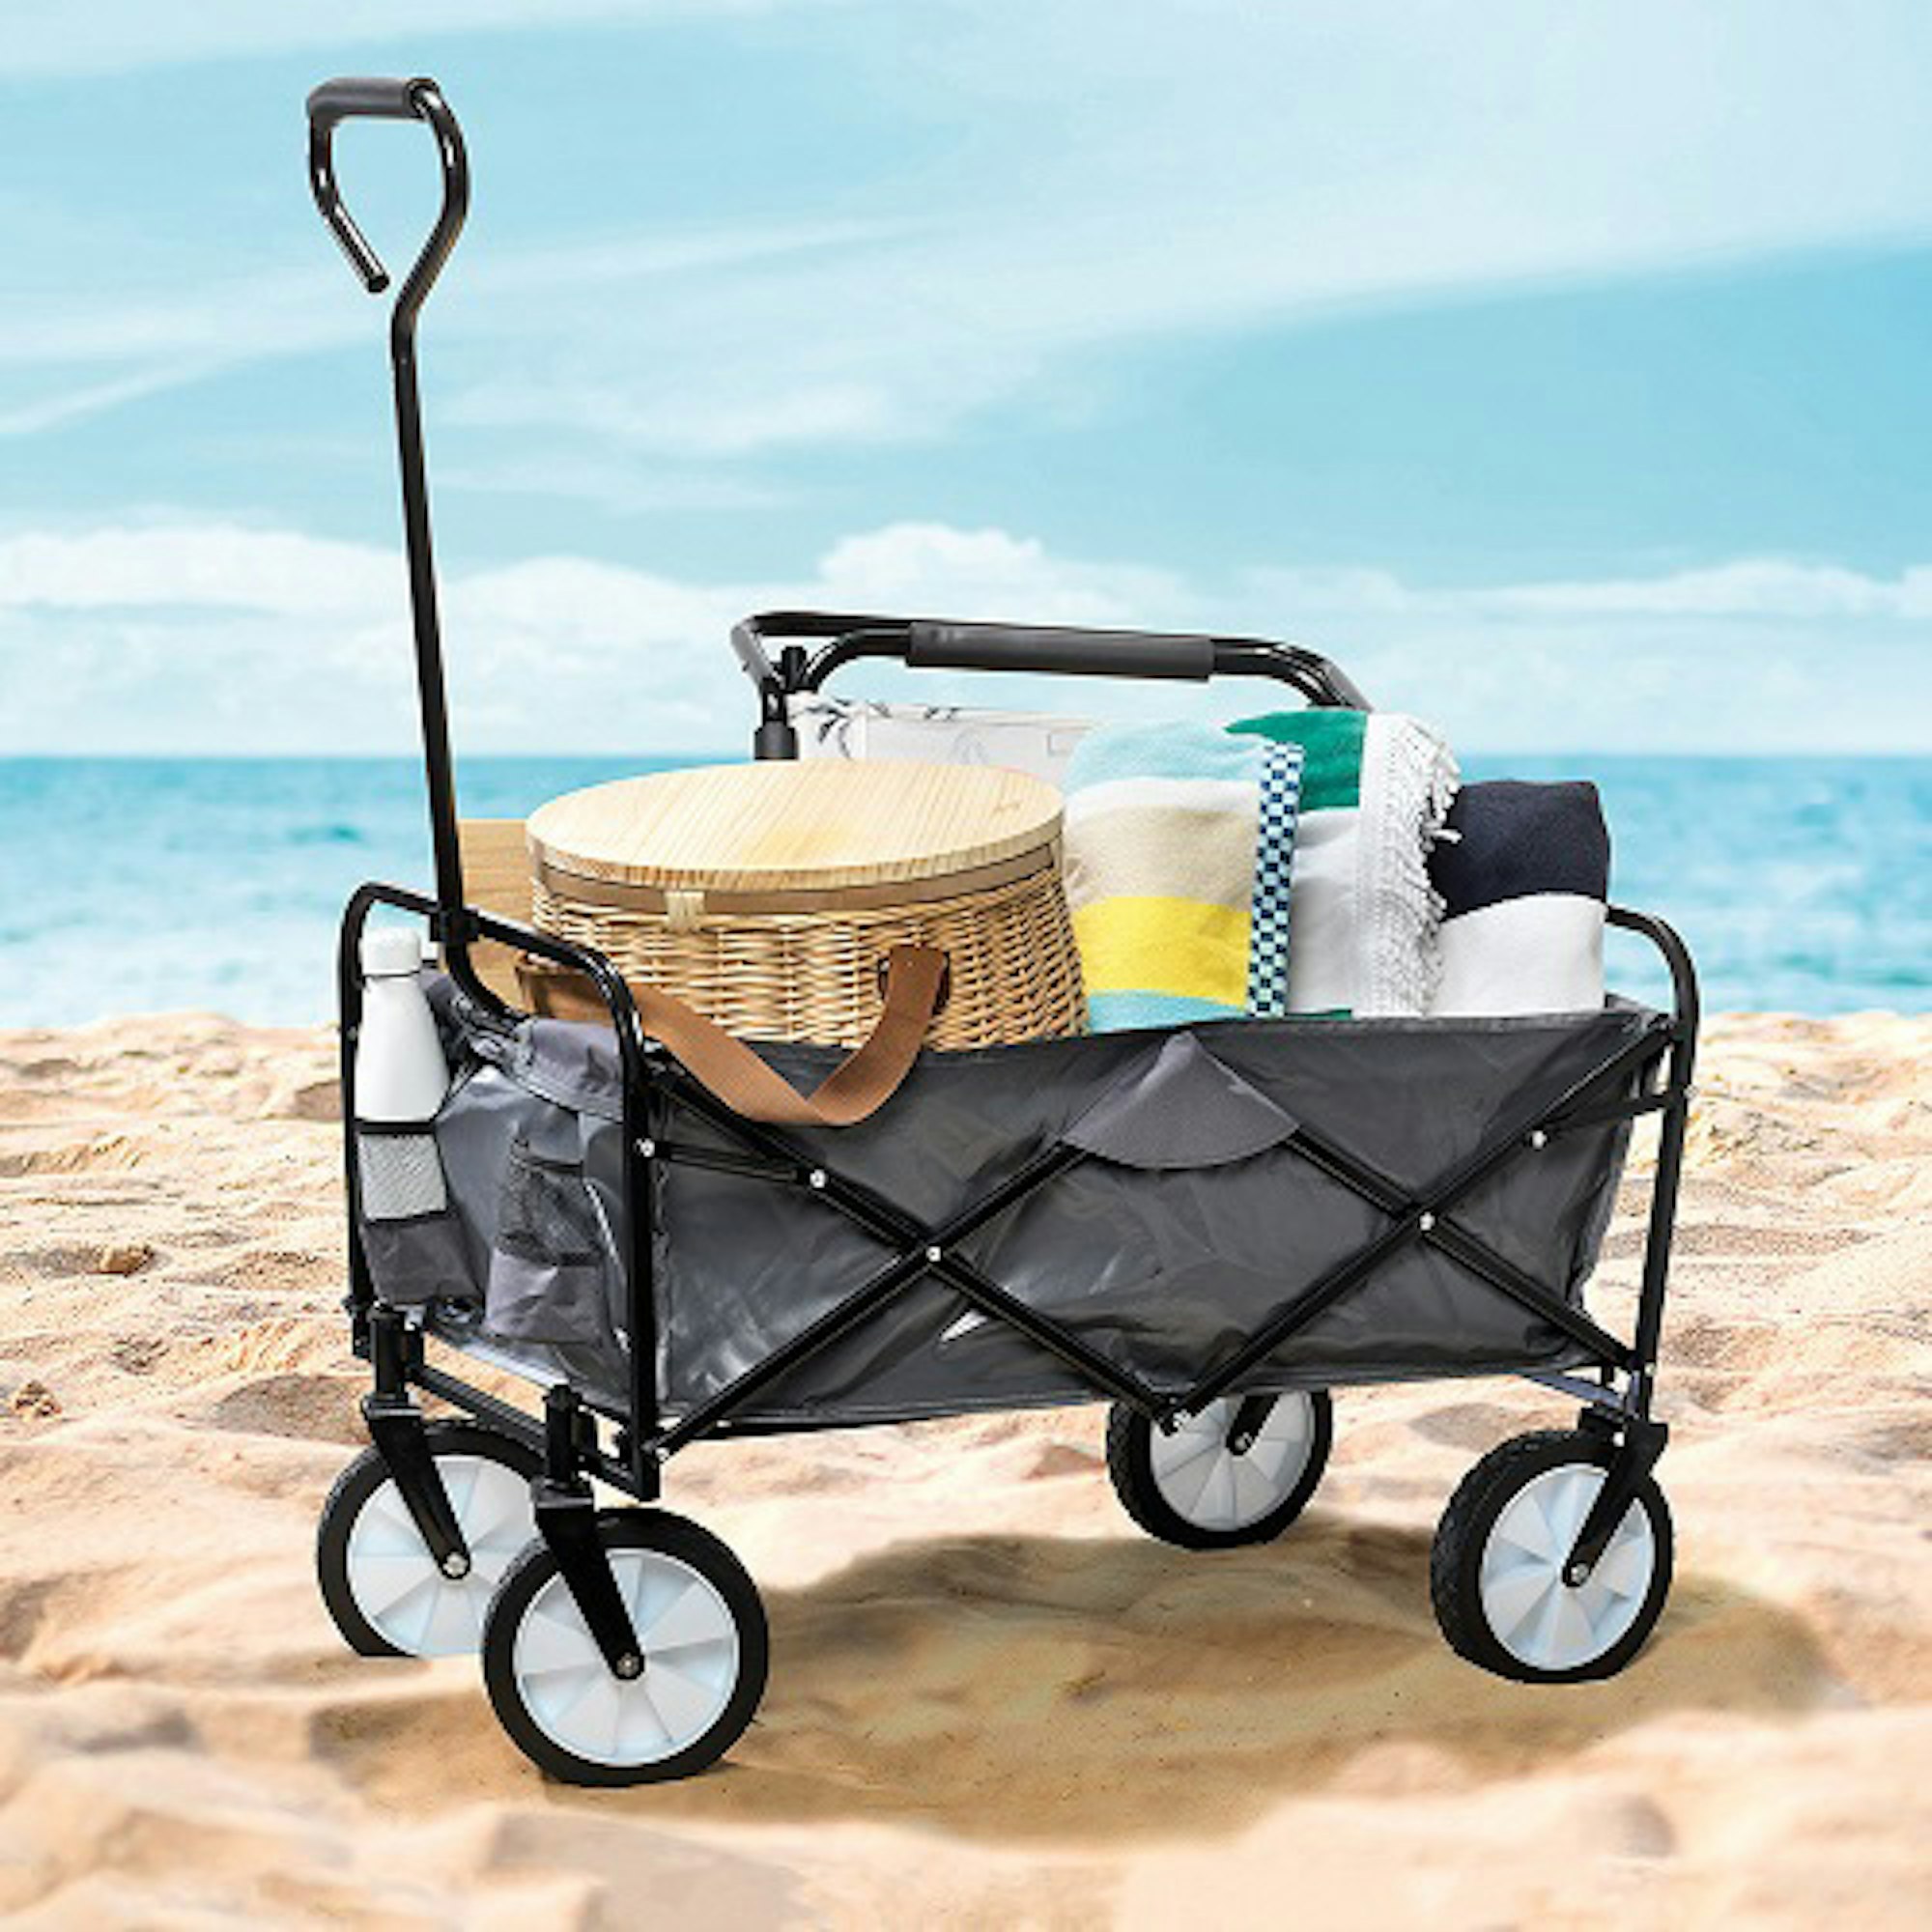 Beach trolley with picnic basket and beach essentials